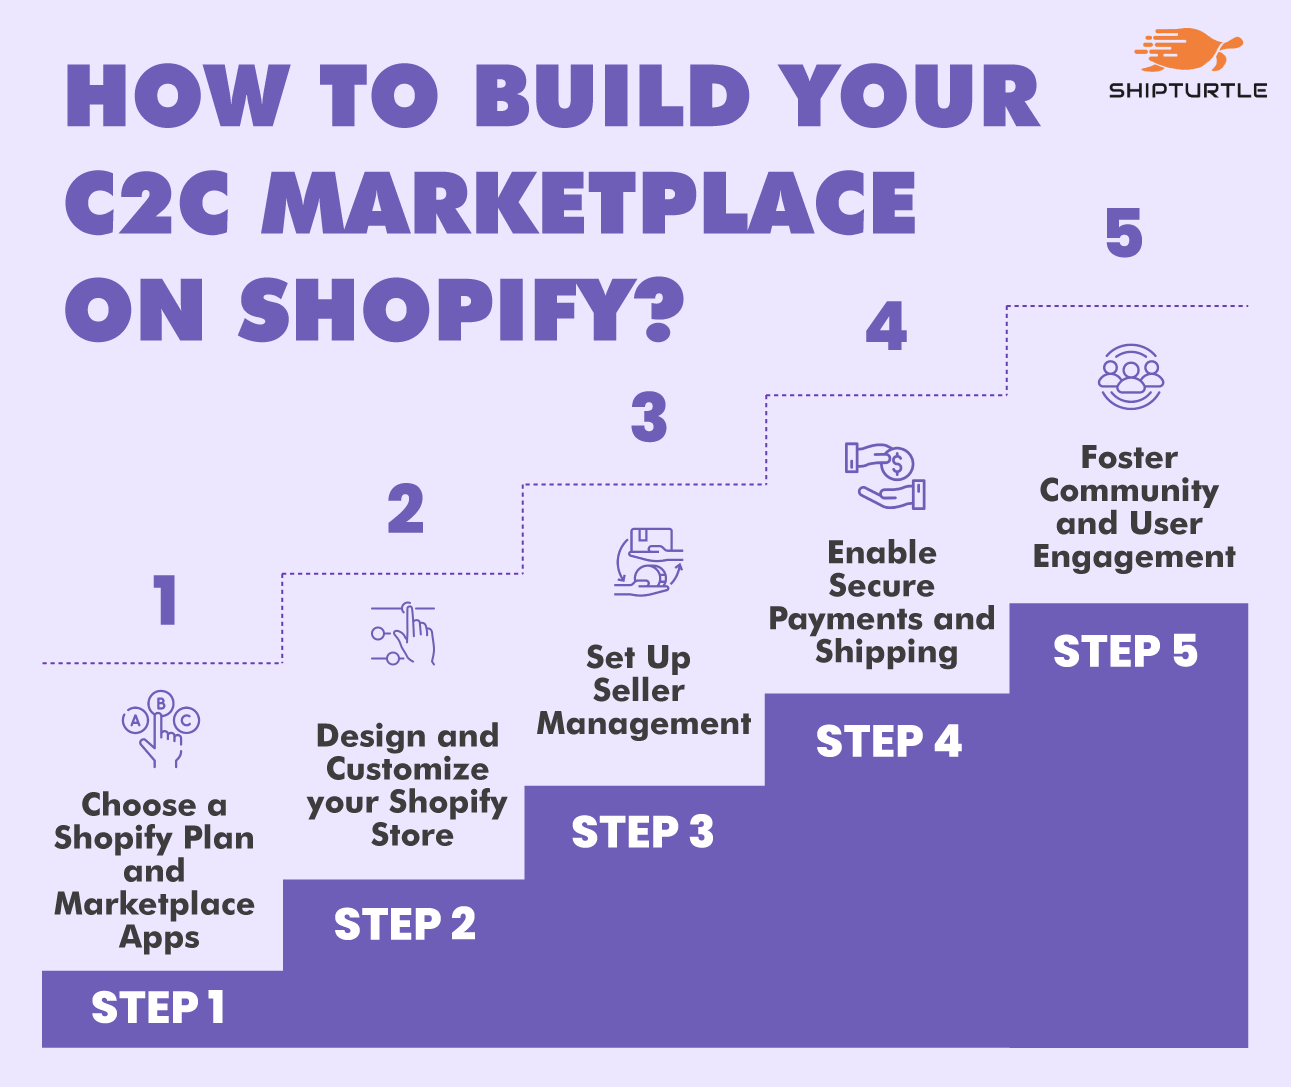 Five Steps to Create a C2C Marketplace on Shopify